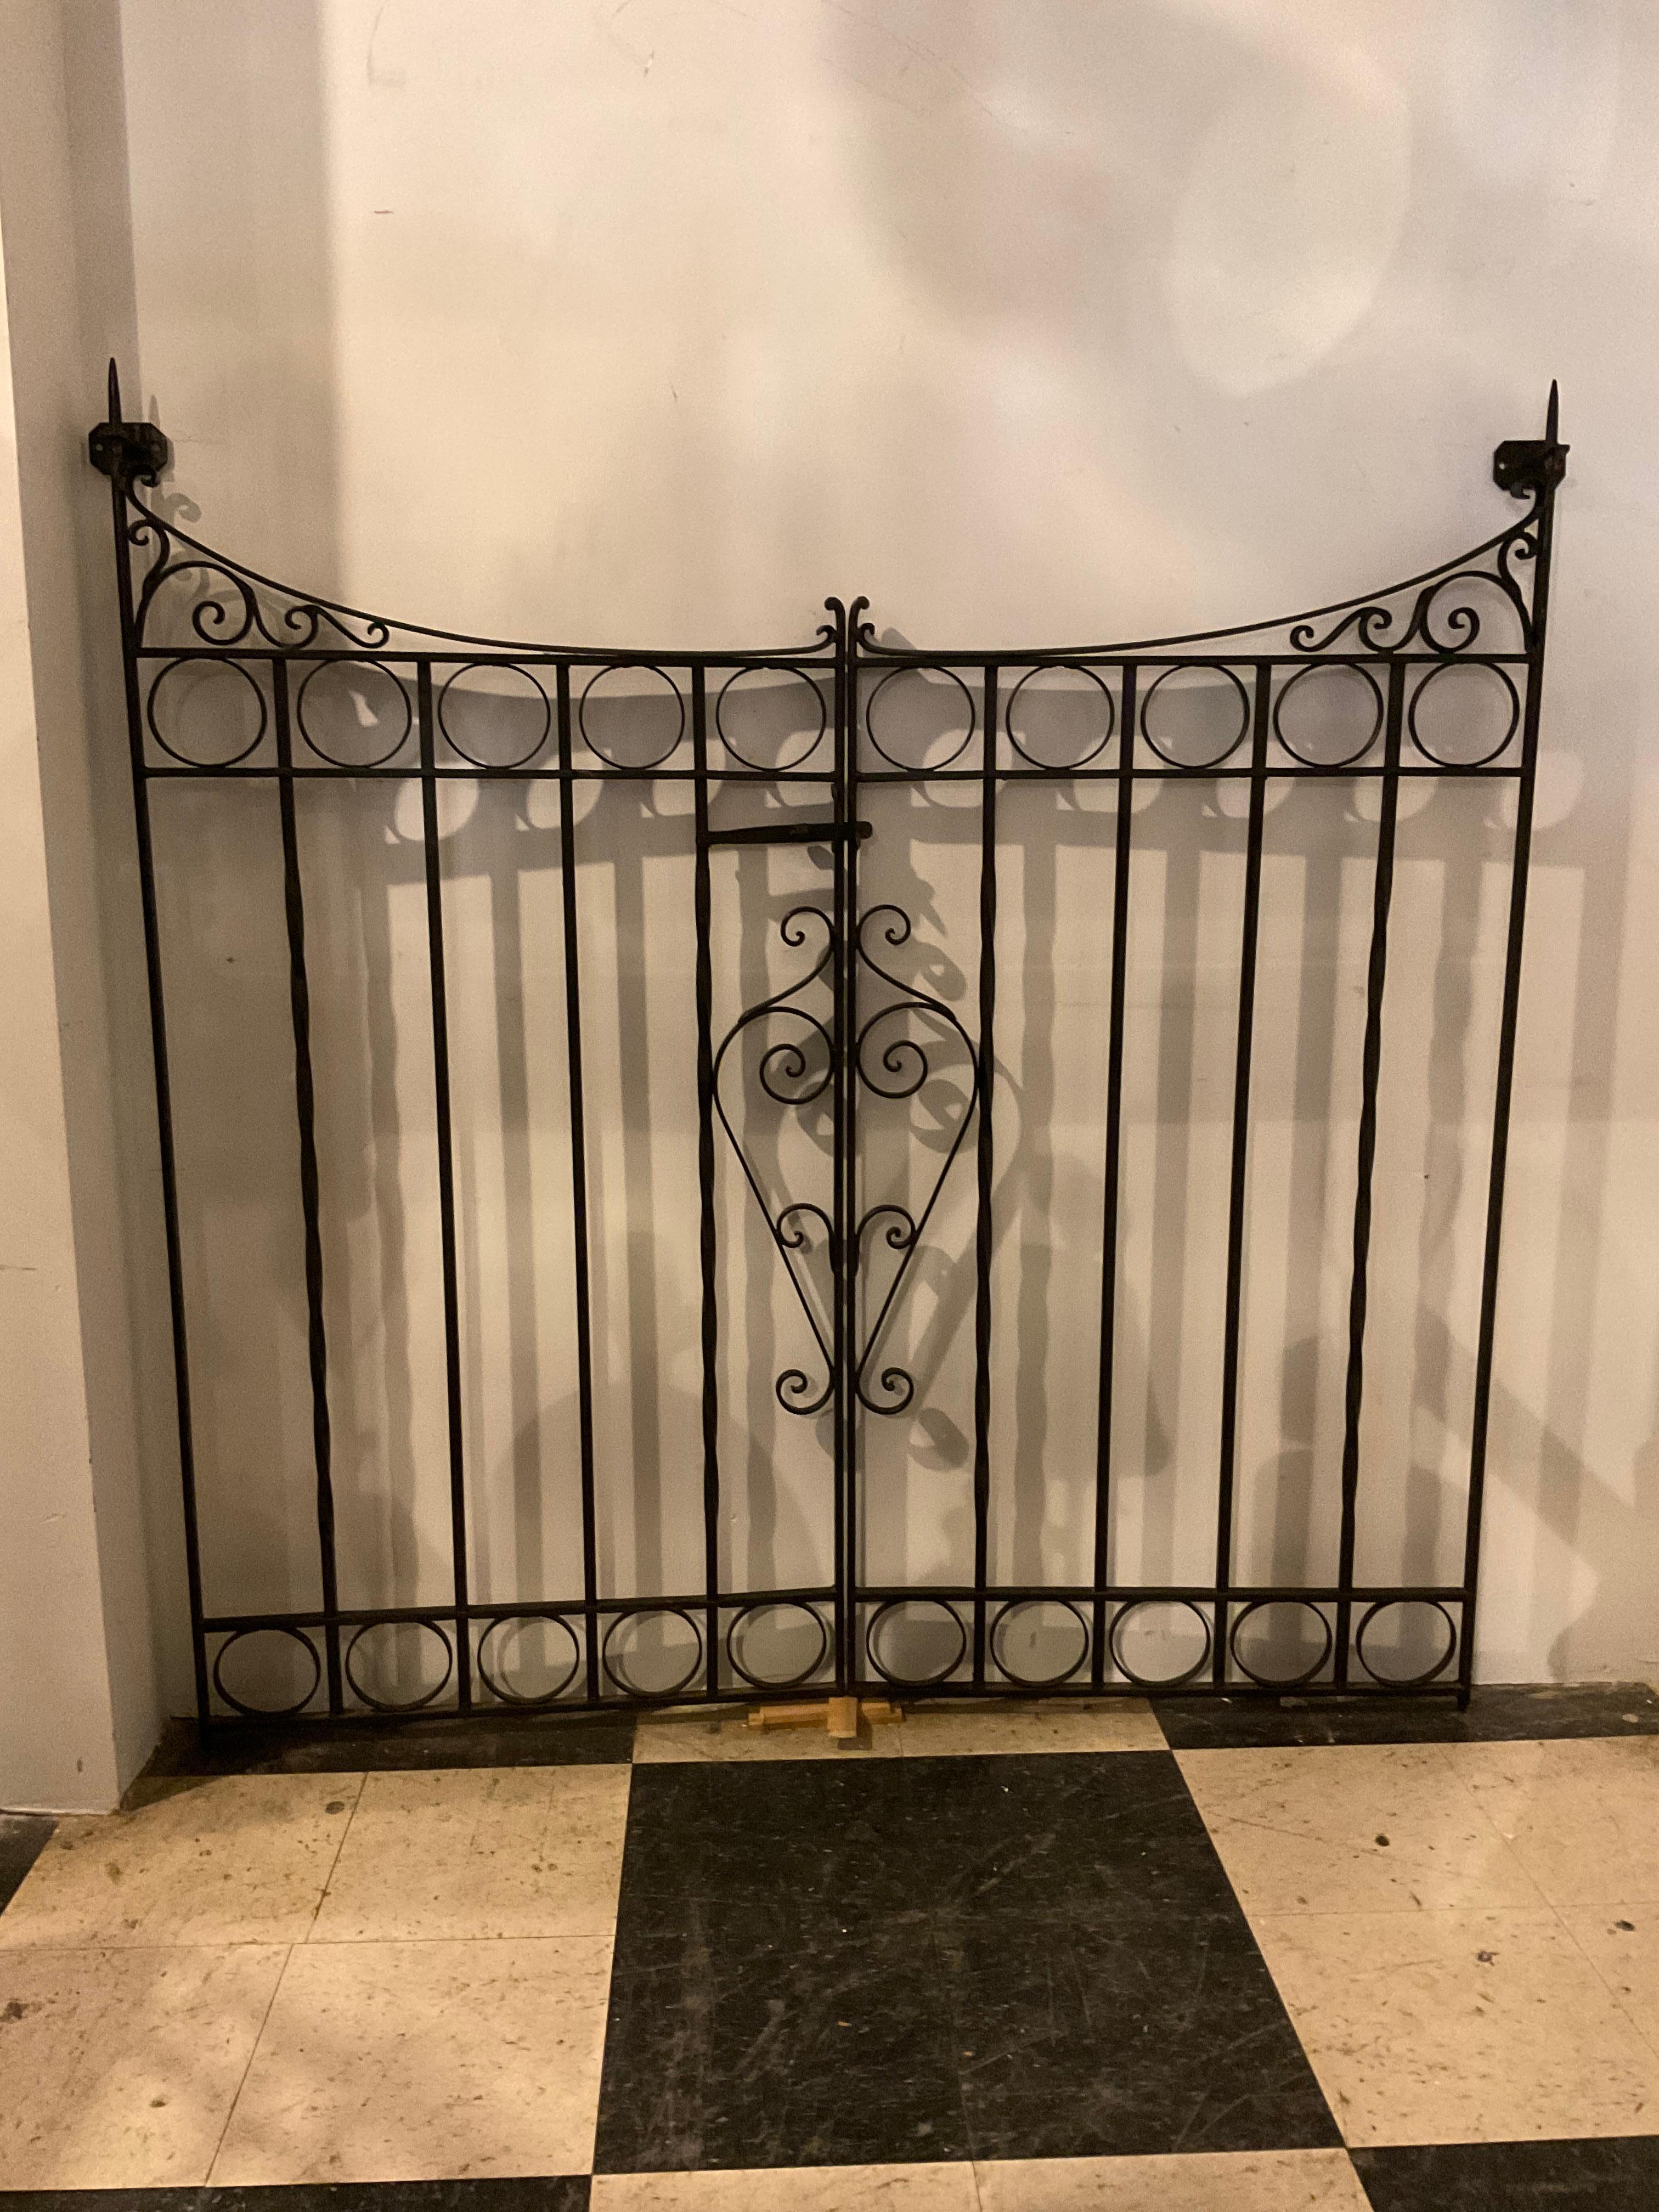 A Pair of wrought iron garden gates. 2 pairs available. Made 70 years ago, kept indoors. One pair, the width is 58”, the other pair, the width is 51”. The price is 1750.00 per pair.
The dimensions of the second pair of gates is …..
H 59.5” W 51”. D